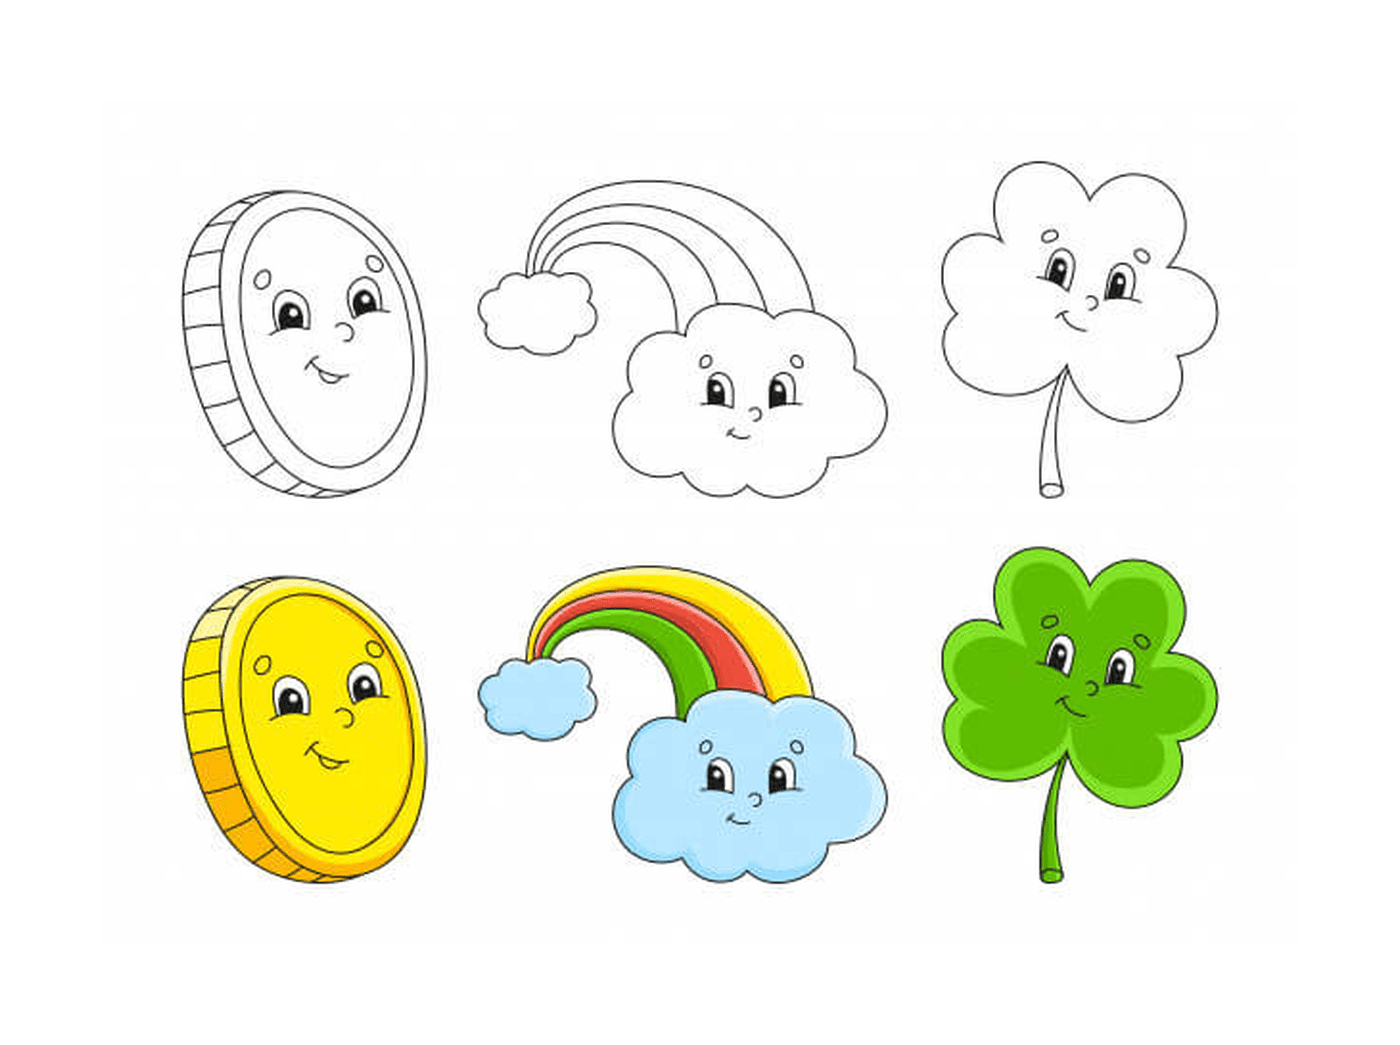  Saint Patrick's Day with clover, rainbow, gold coin 